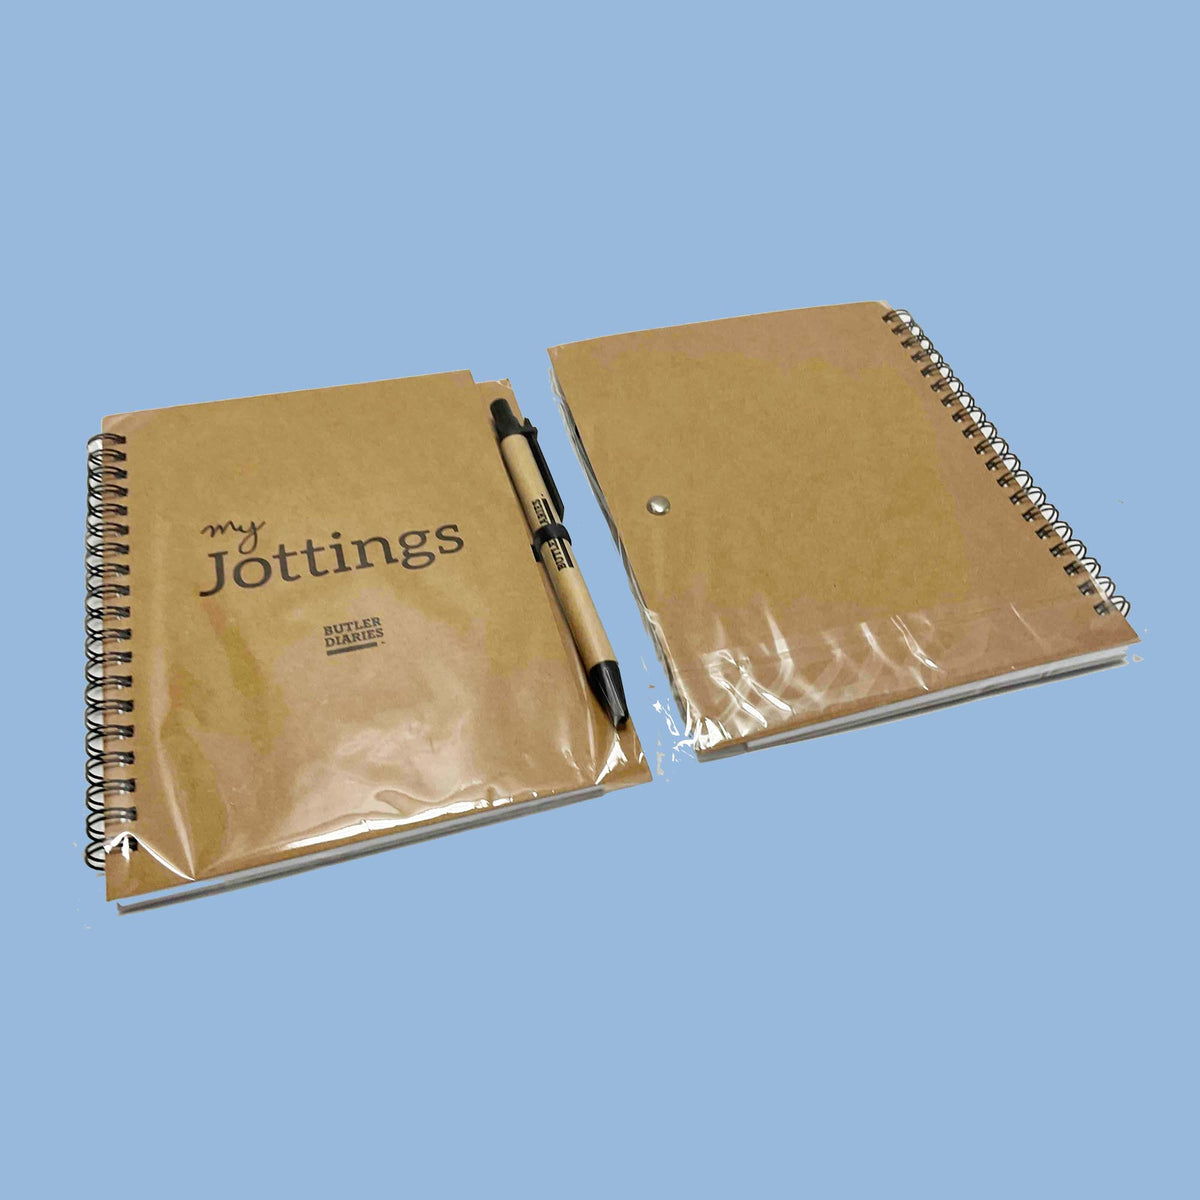 Jottings pad and pen